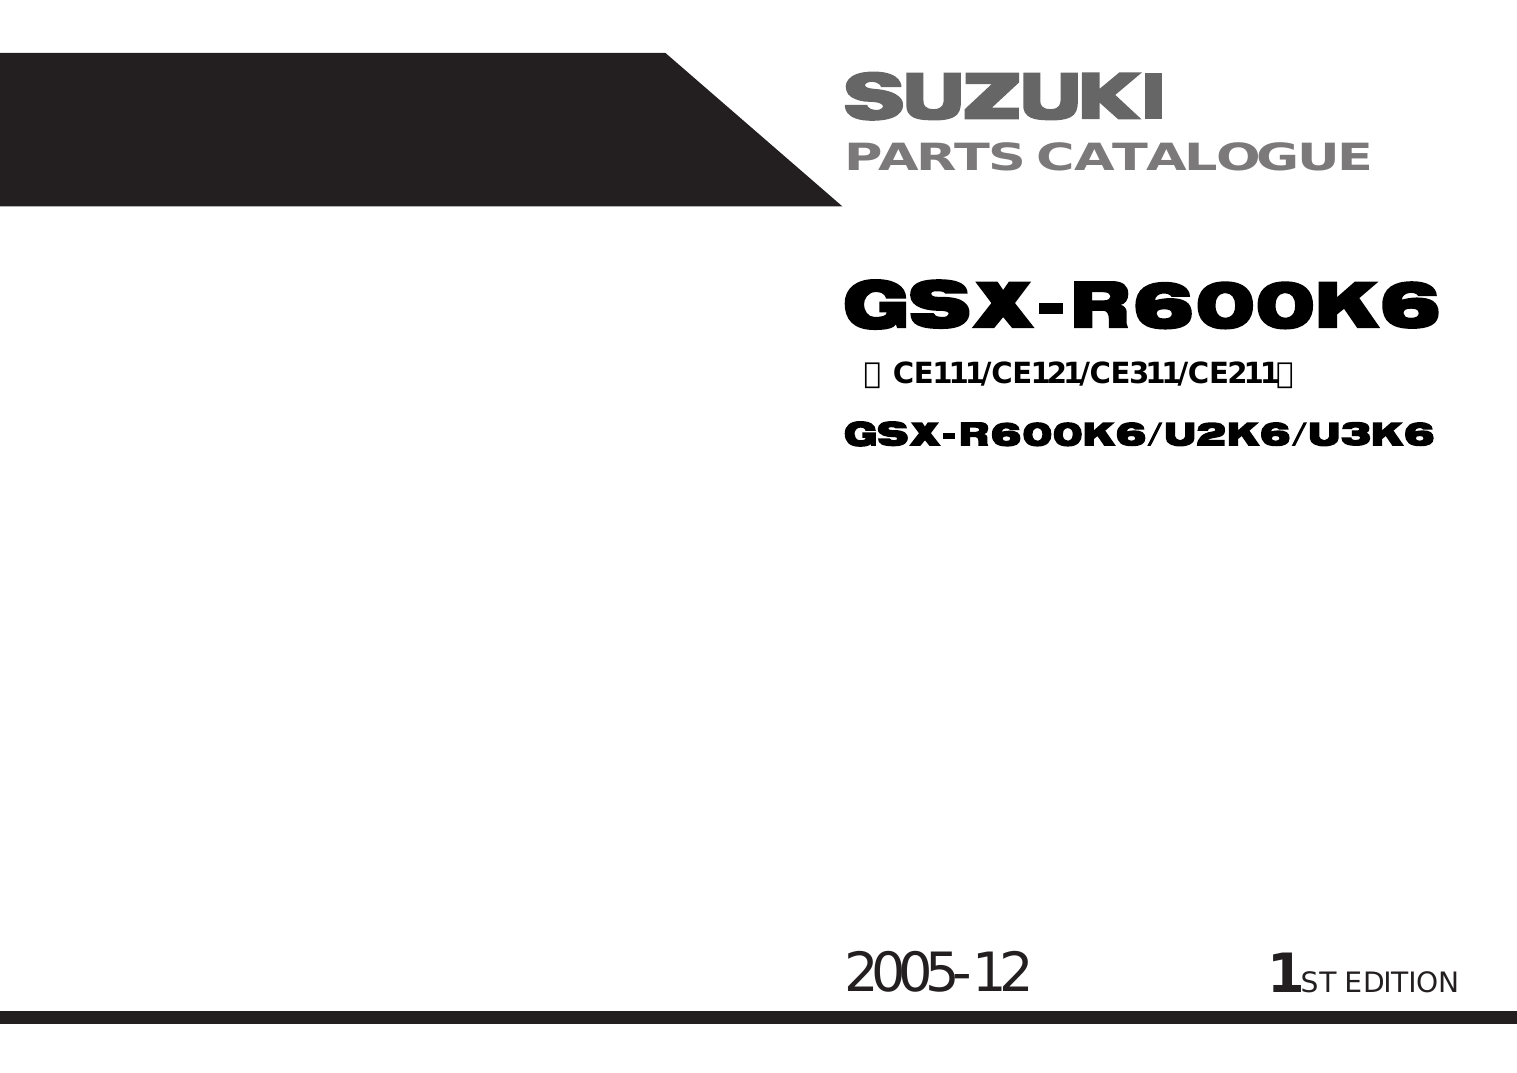 2006-2007 Suzuki GSX-R600 parts and service manual Preview image 1